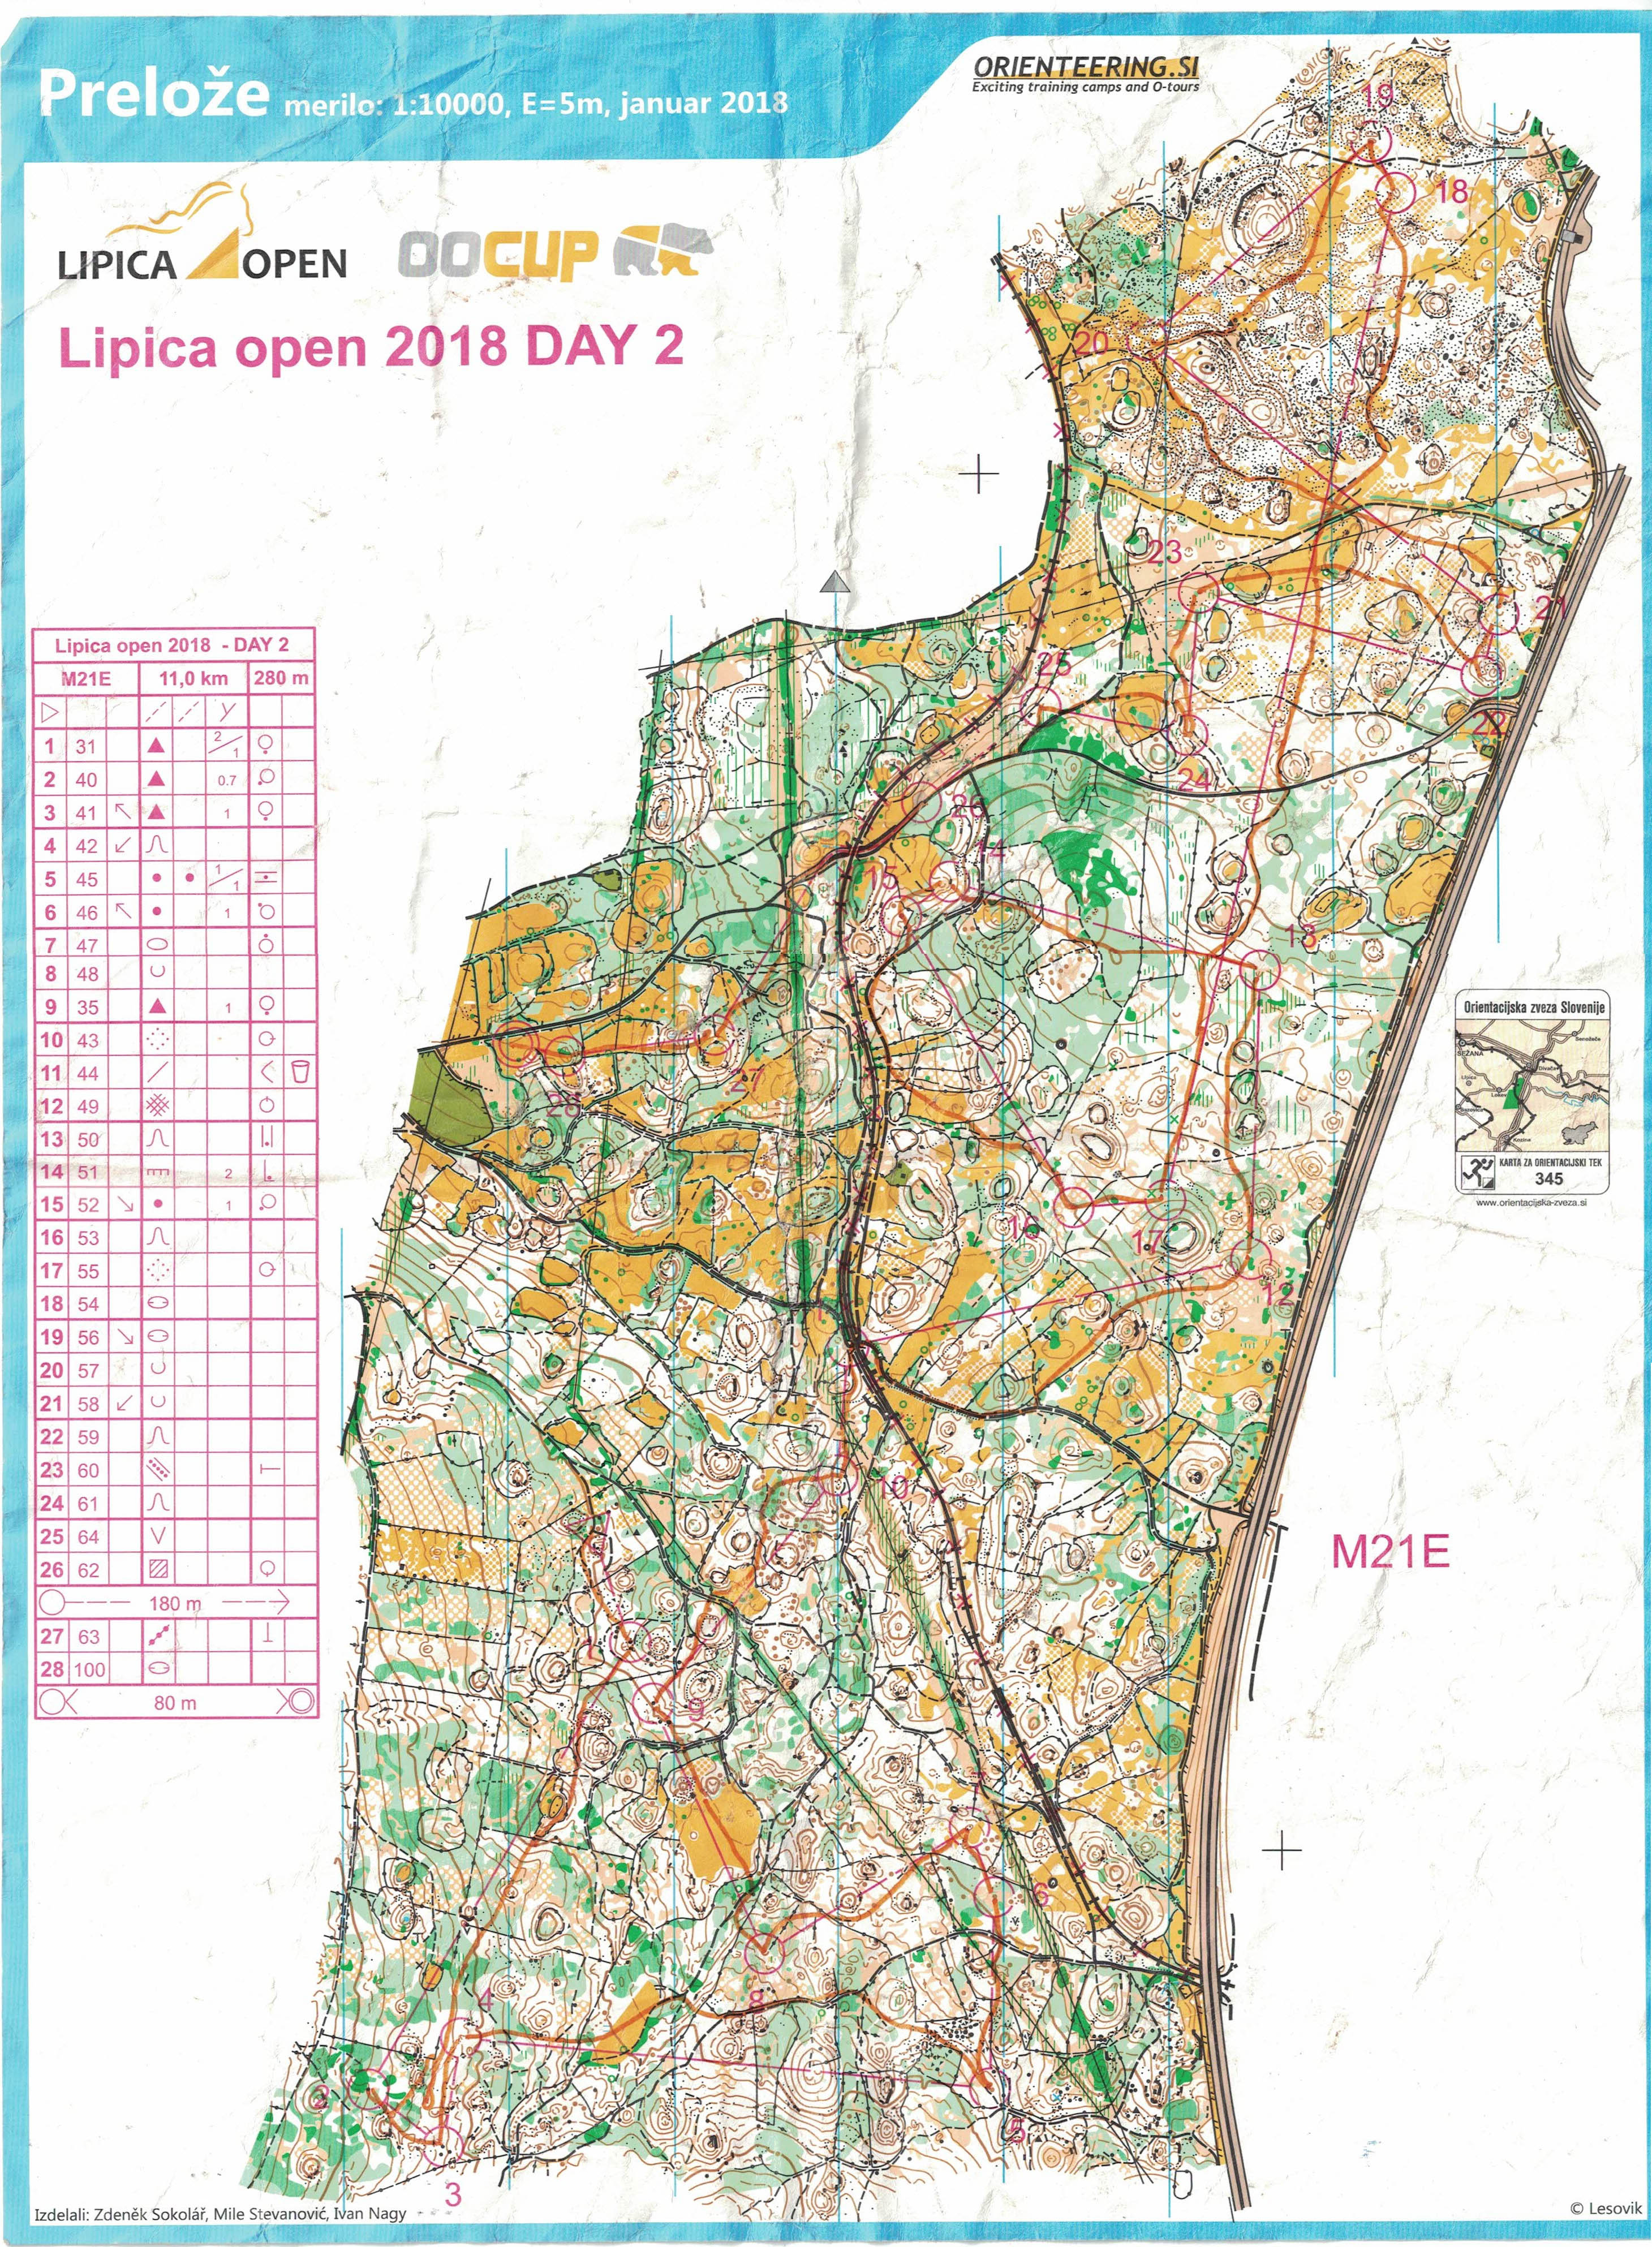 Lipica Open Day 2 (2018-03-11)